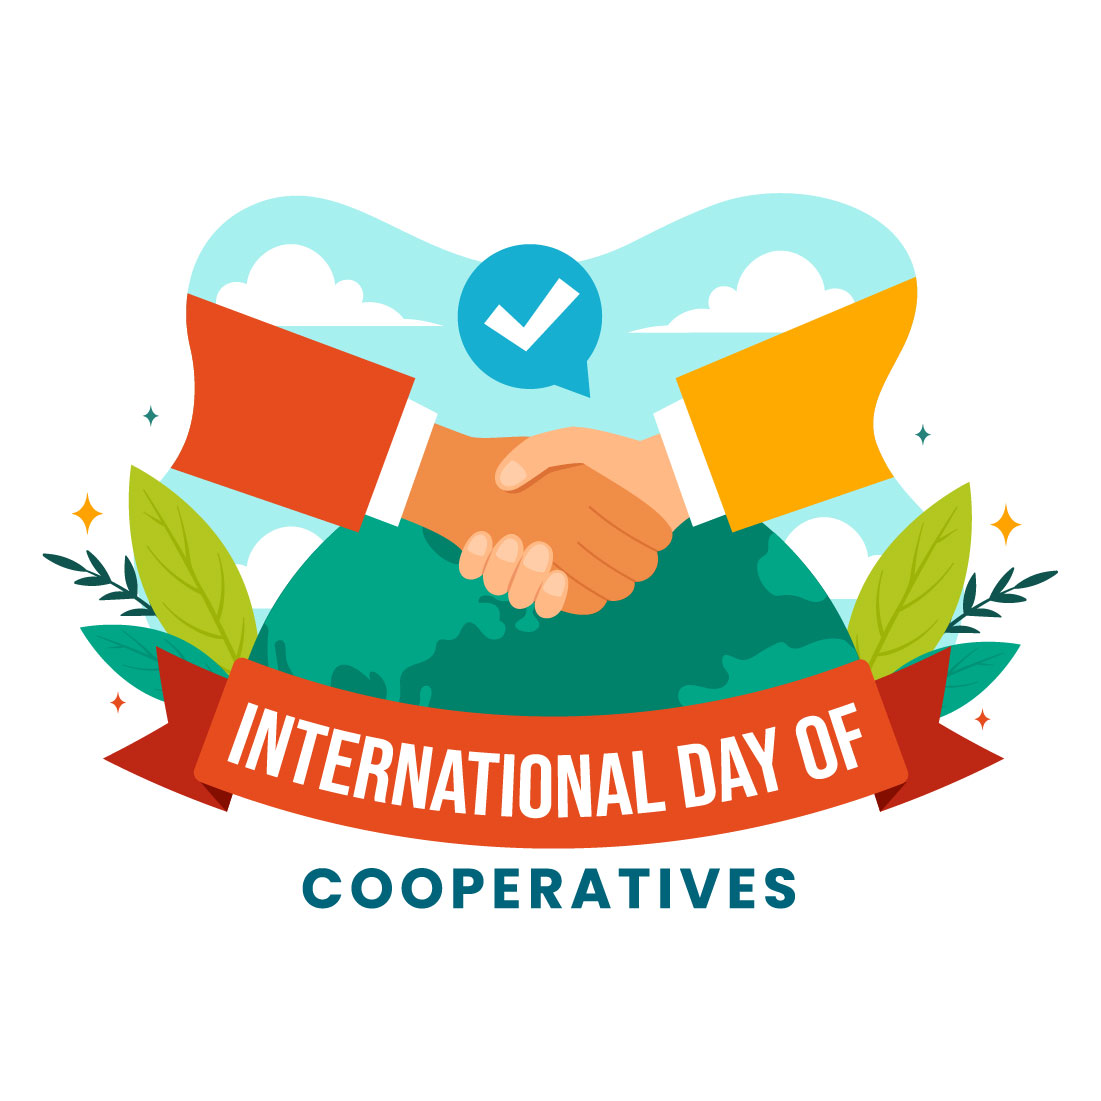 9 International Day of Cooperatives Illustration preview image.